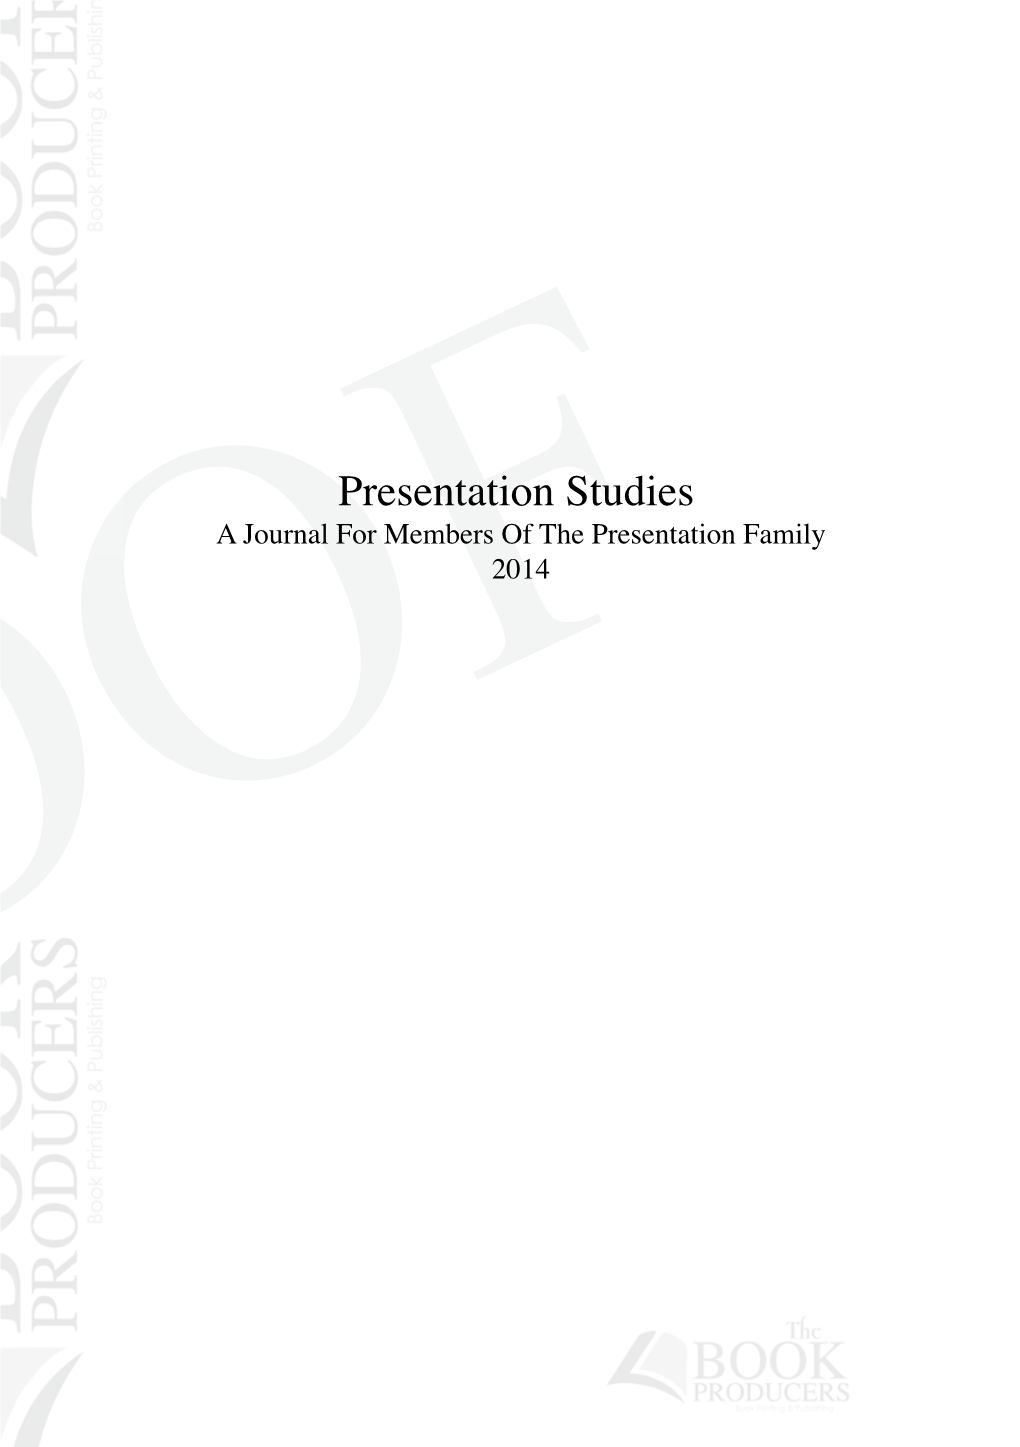 Presentation Studies a Journal for Members of the Presentation Family 2014 PROOF Contents